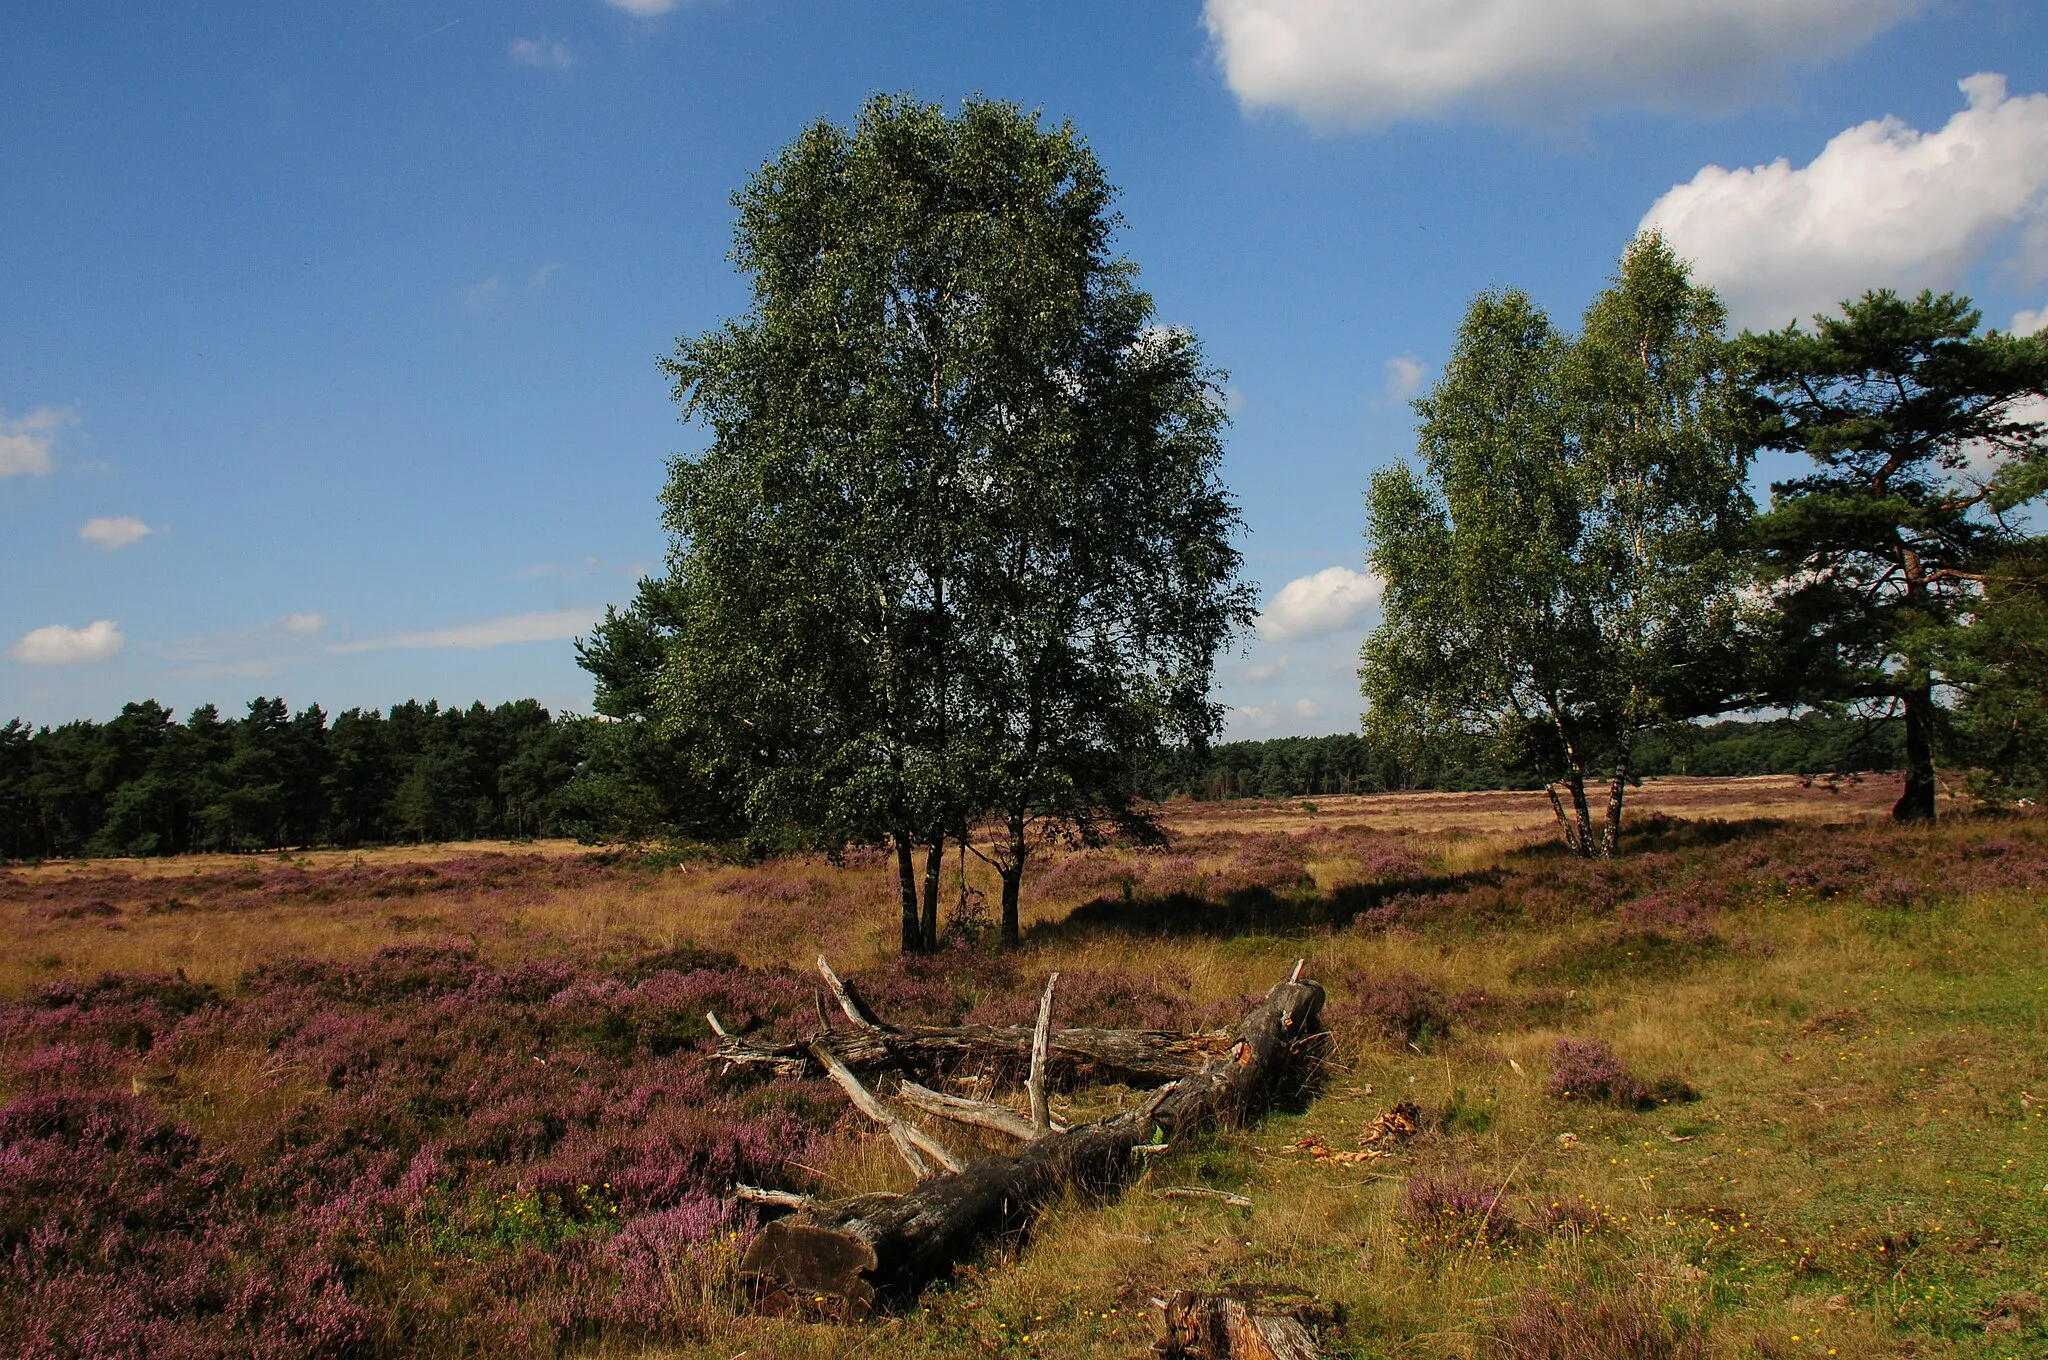 Photo showing: Heaatherfields at Planken Wambuis end of August with nice purple flowering